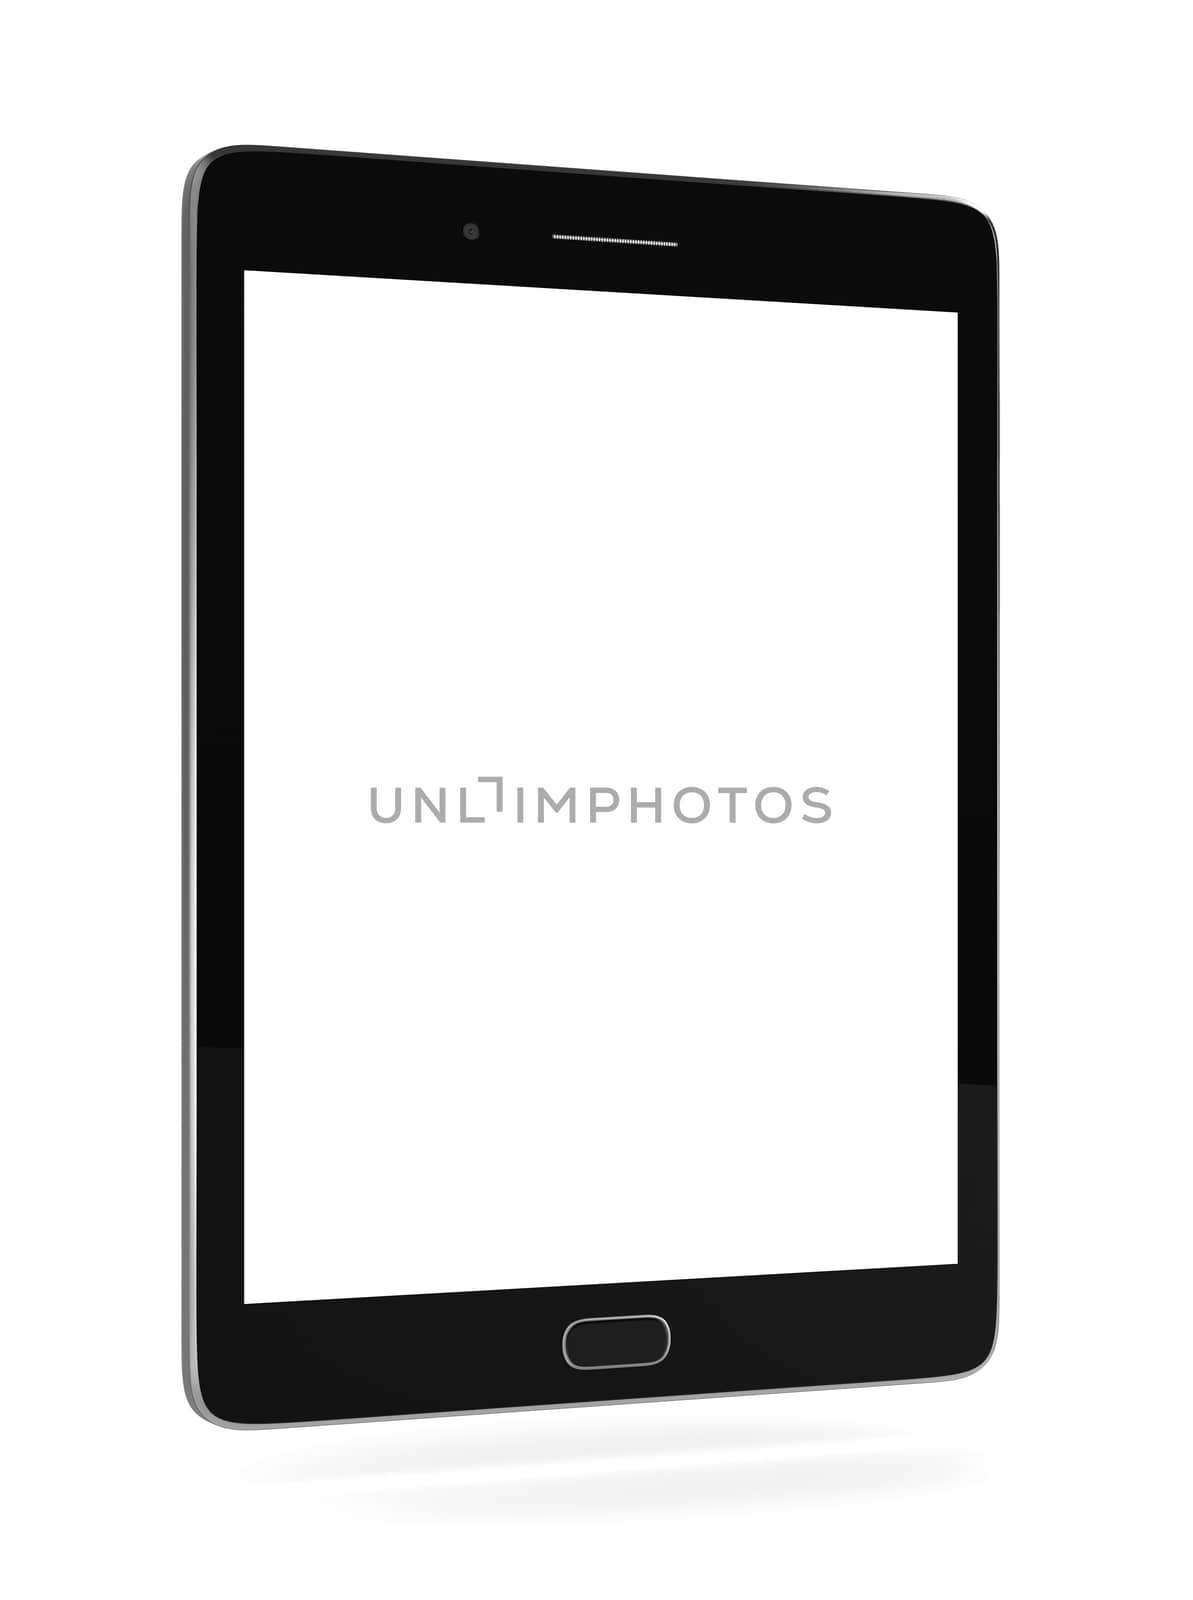 Standing Tablet Pc Turned Off with White Blank Display Isolated on White Background 3D Illustration